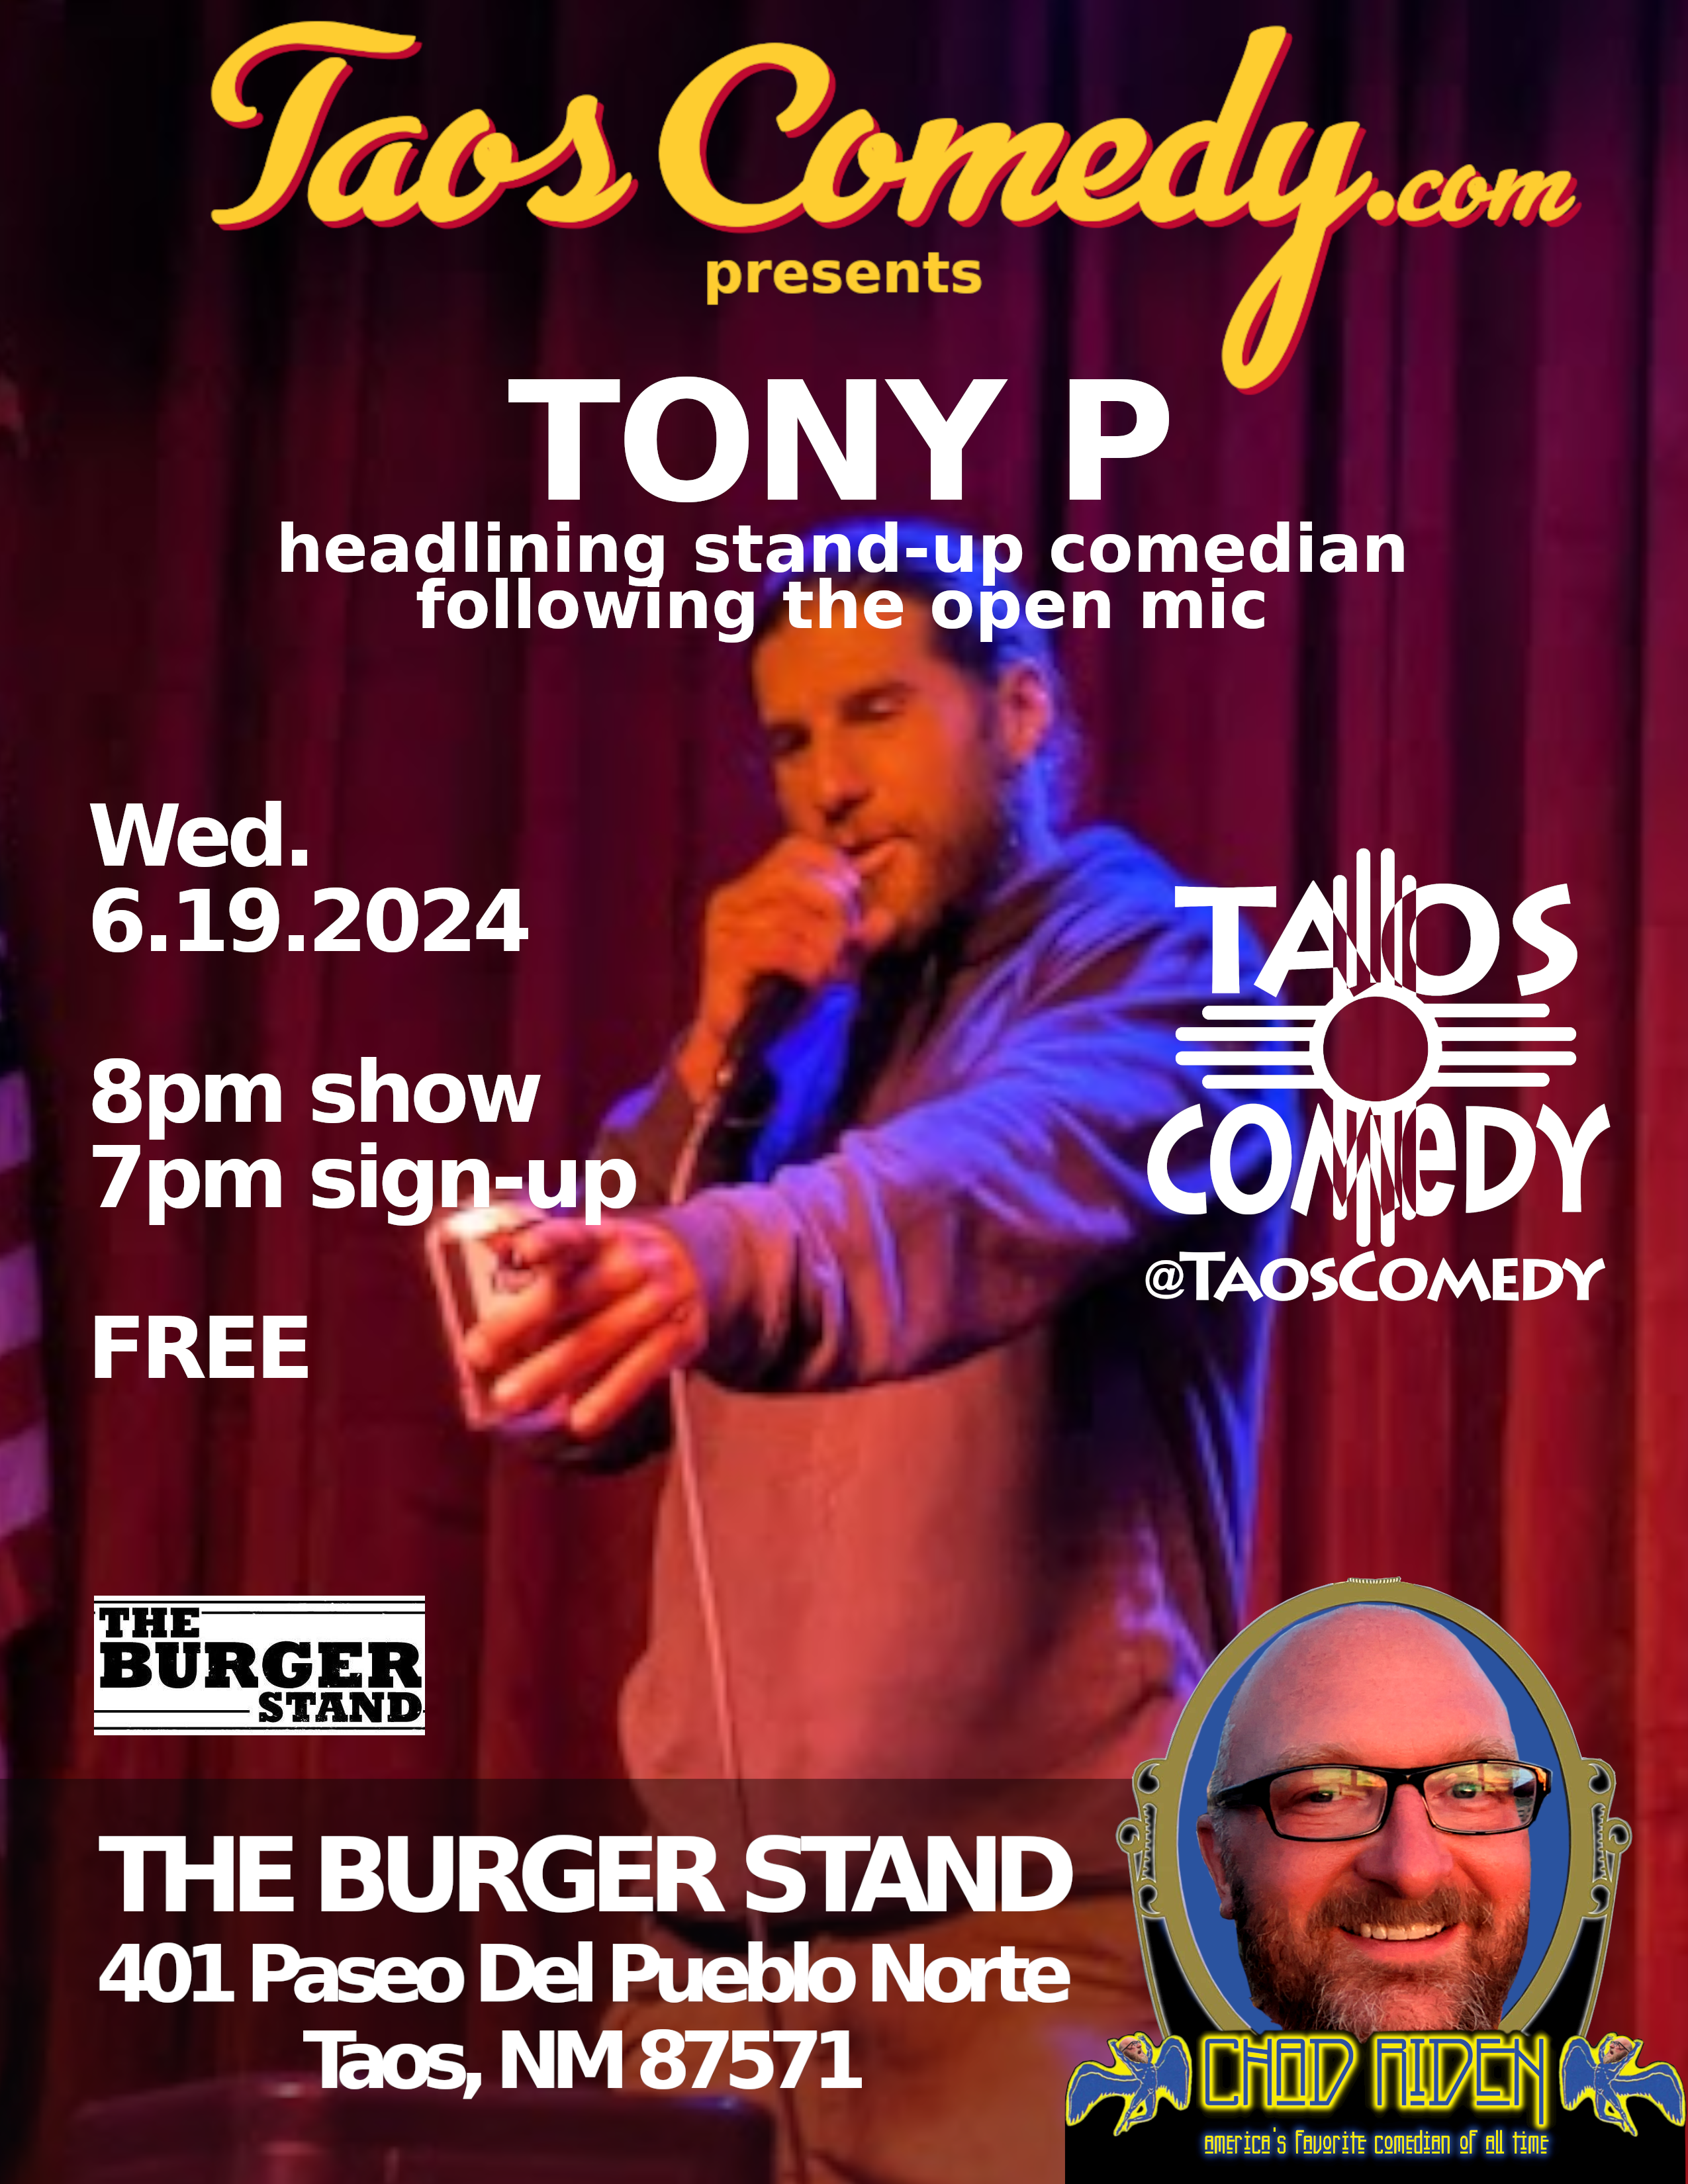 Tony P headlines the open mic at The Burger Stand 6/19/2024